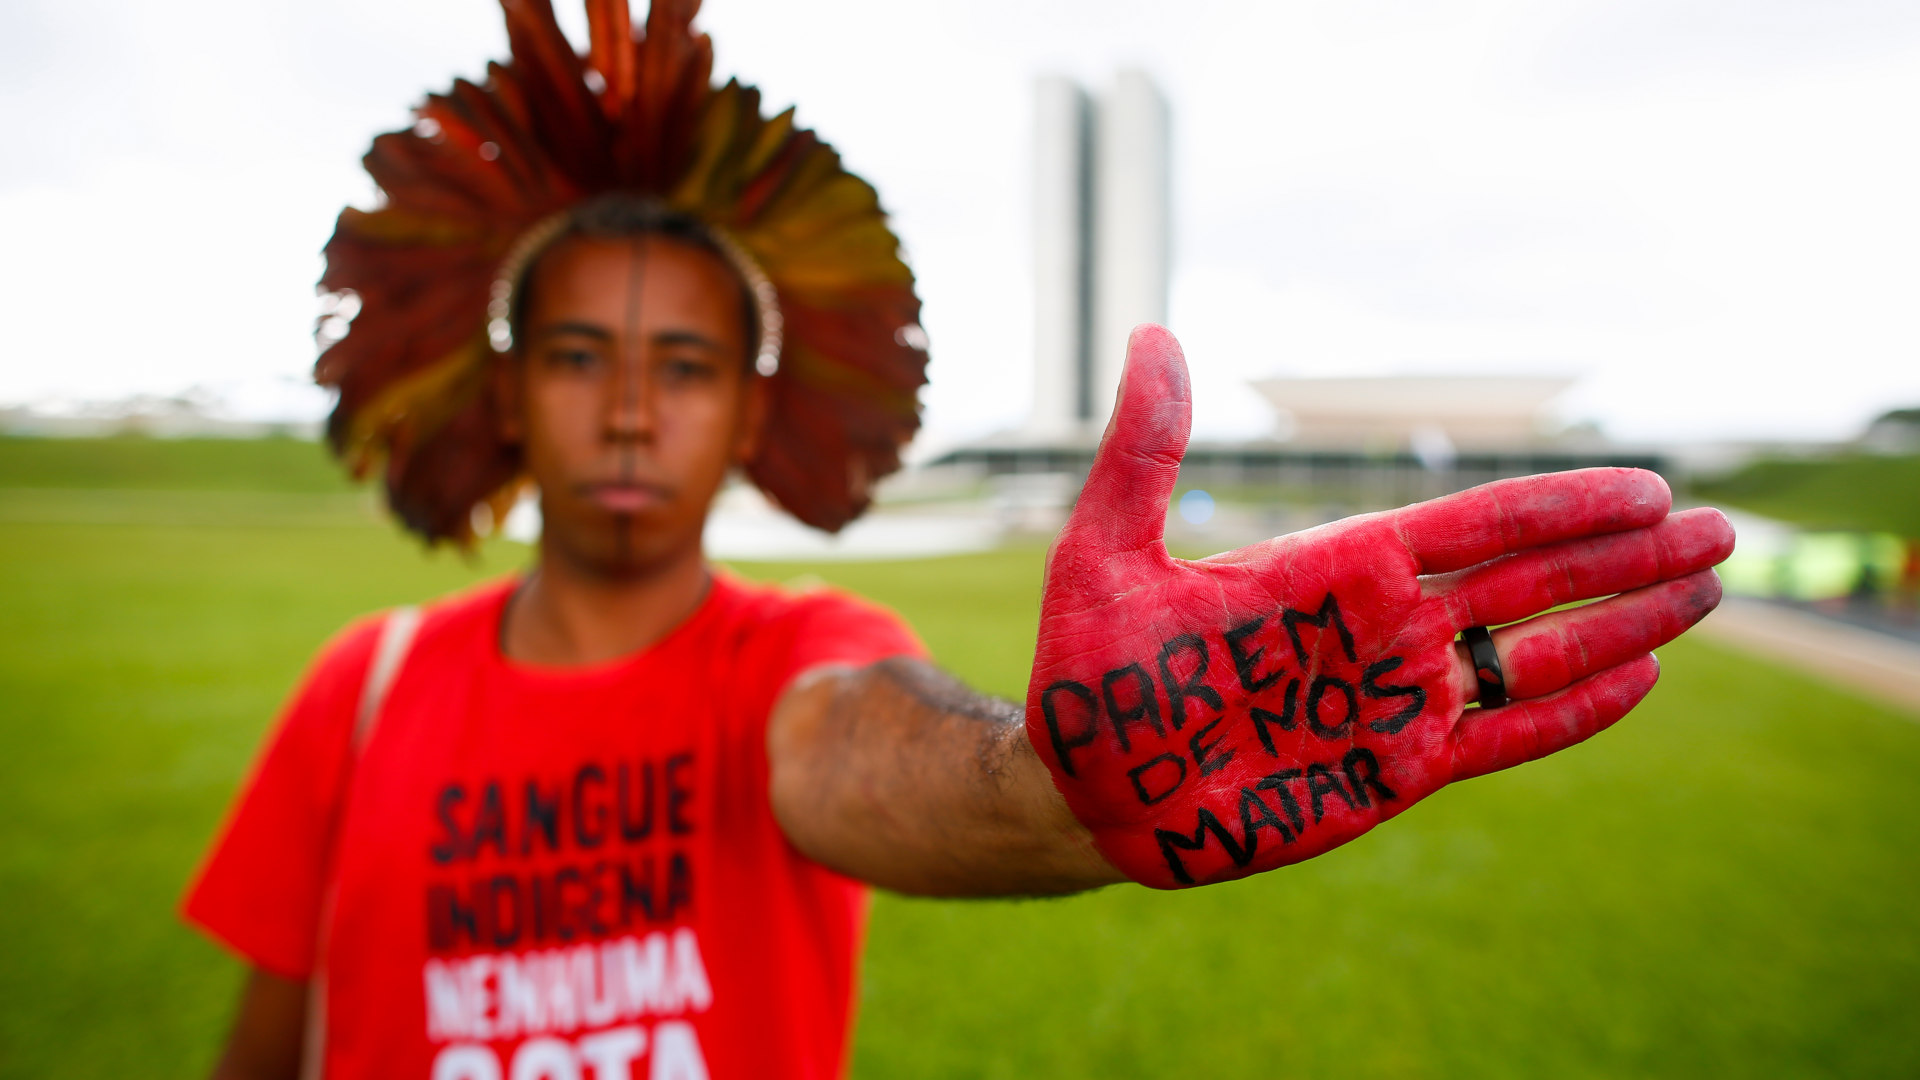 An Indigenous man's hand reads "Stop killing us" during a Feb. 2020 protest against a bill that would open Indigenous lands to mining in Brazil.